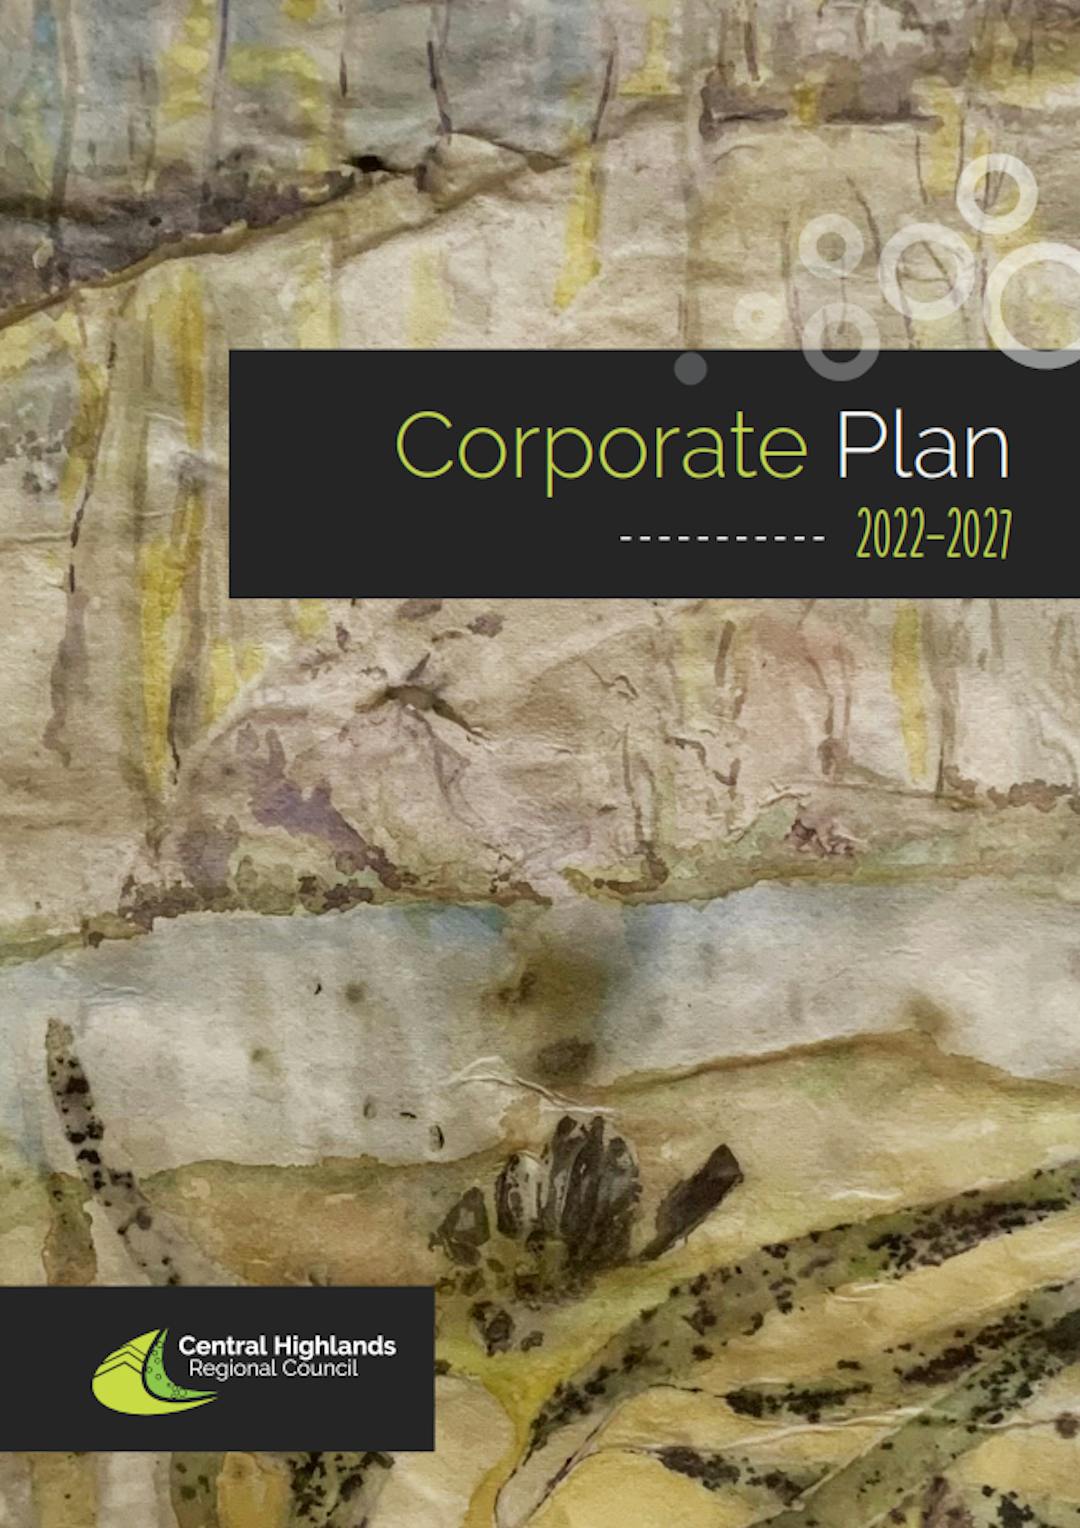 Cover page of the draft corporate plan